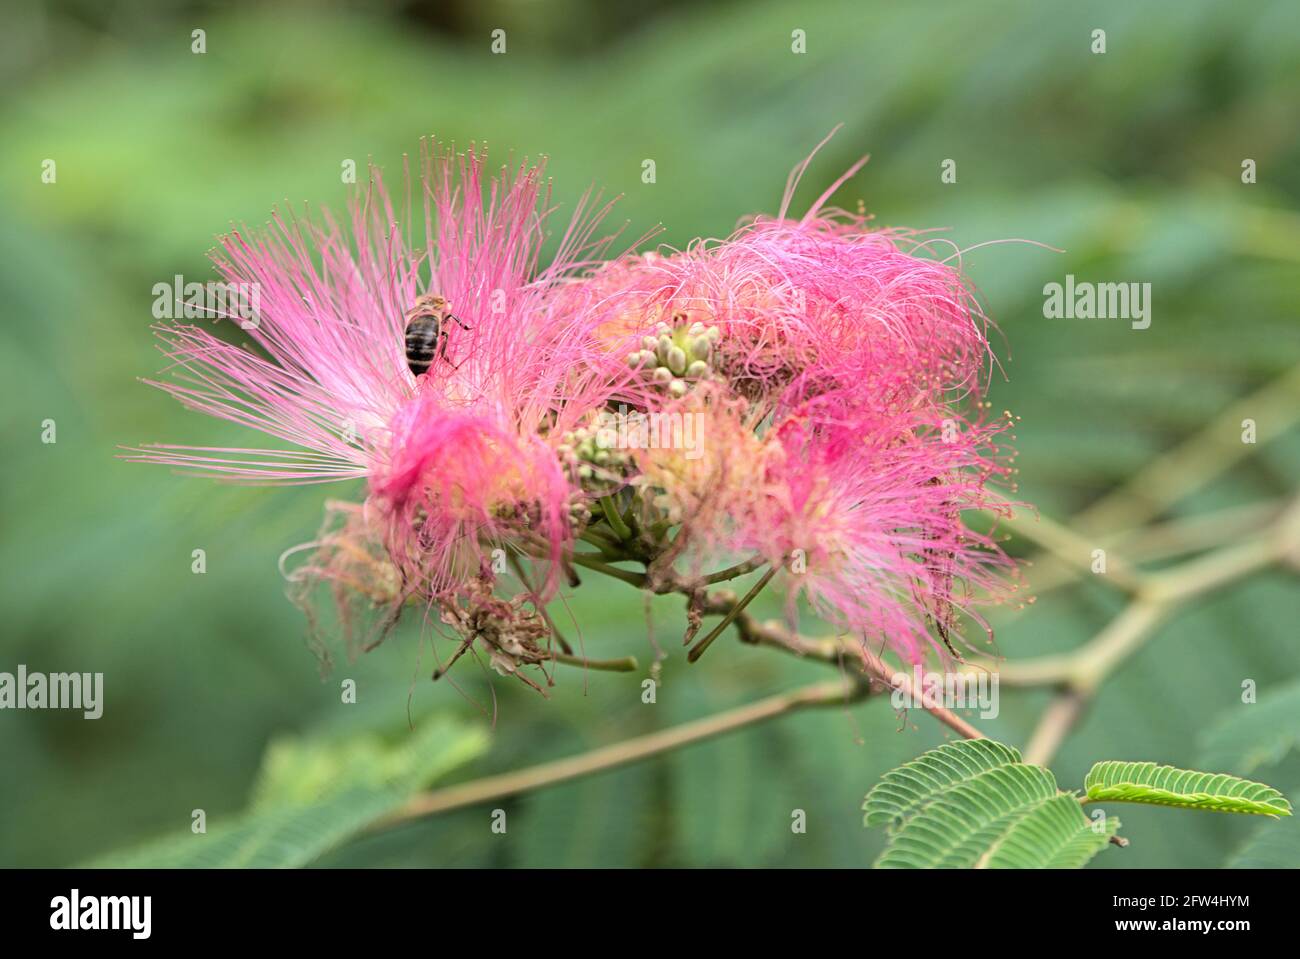 Honey bee is polinating flowers of Albizia (Albisia) julibrissin, Paraserianthes lophantha, picture with shallow depth of field Stock Photo